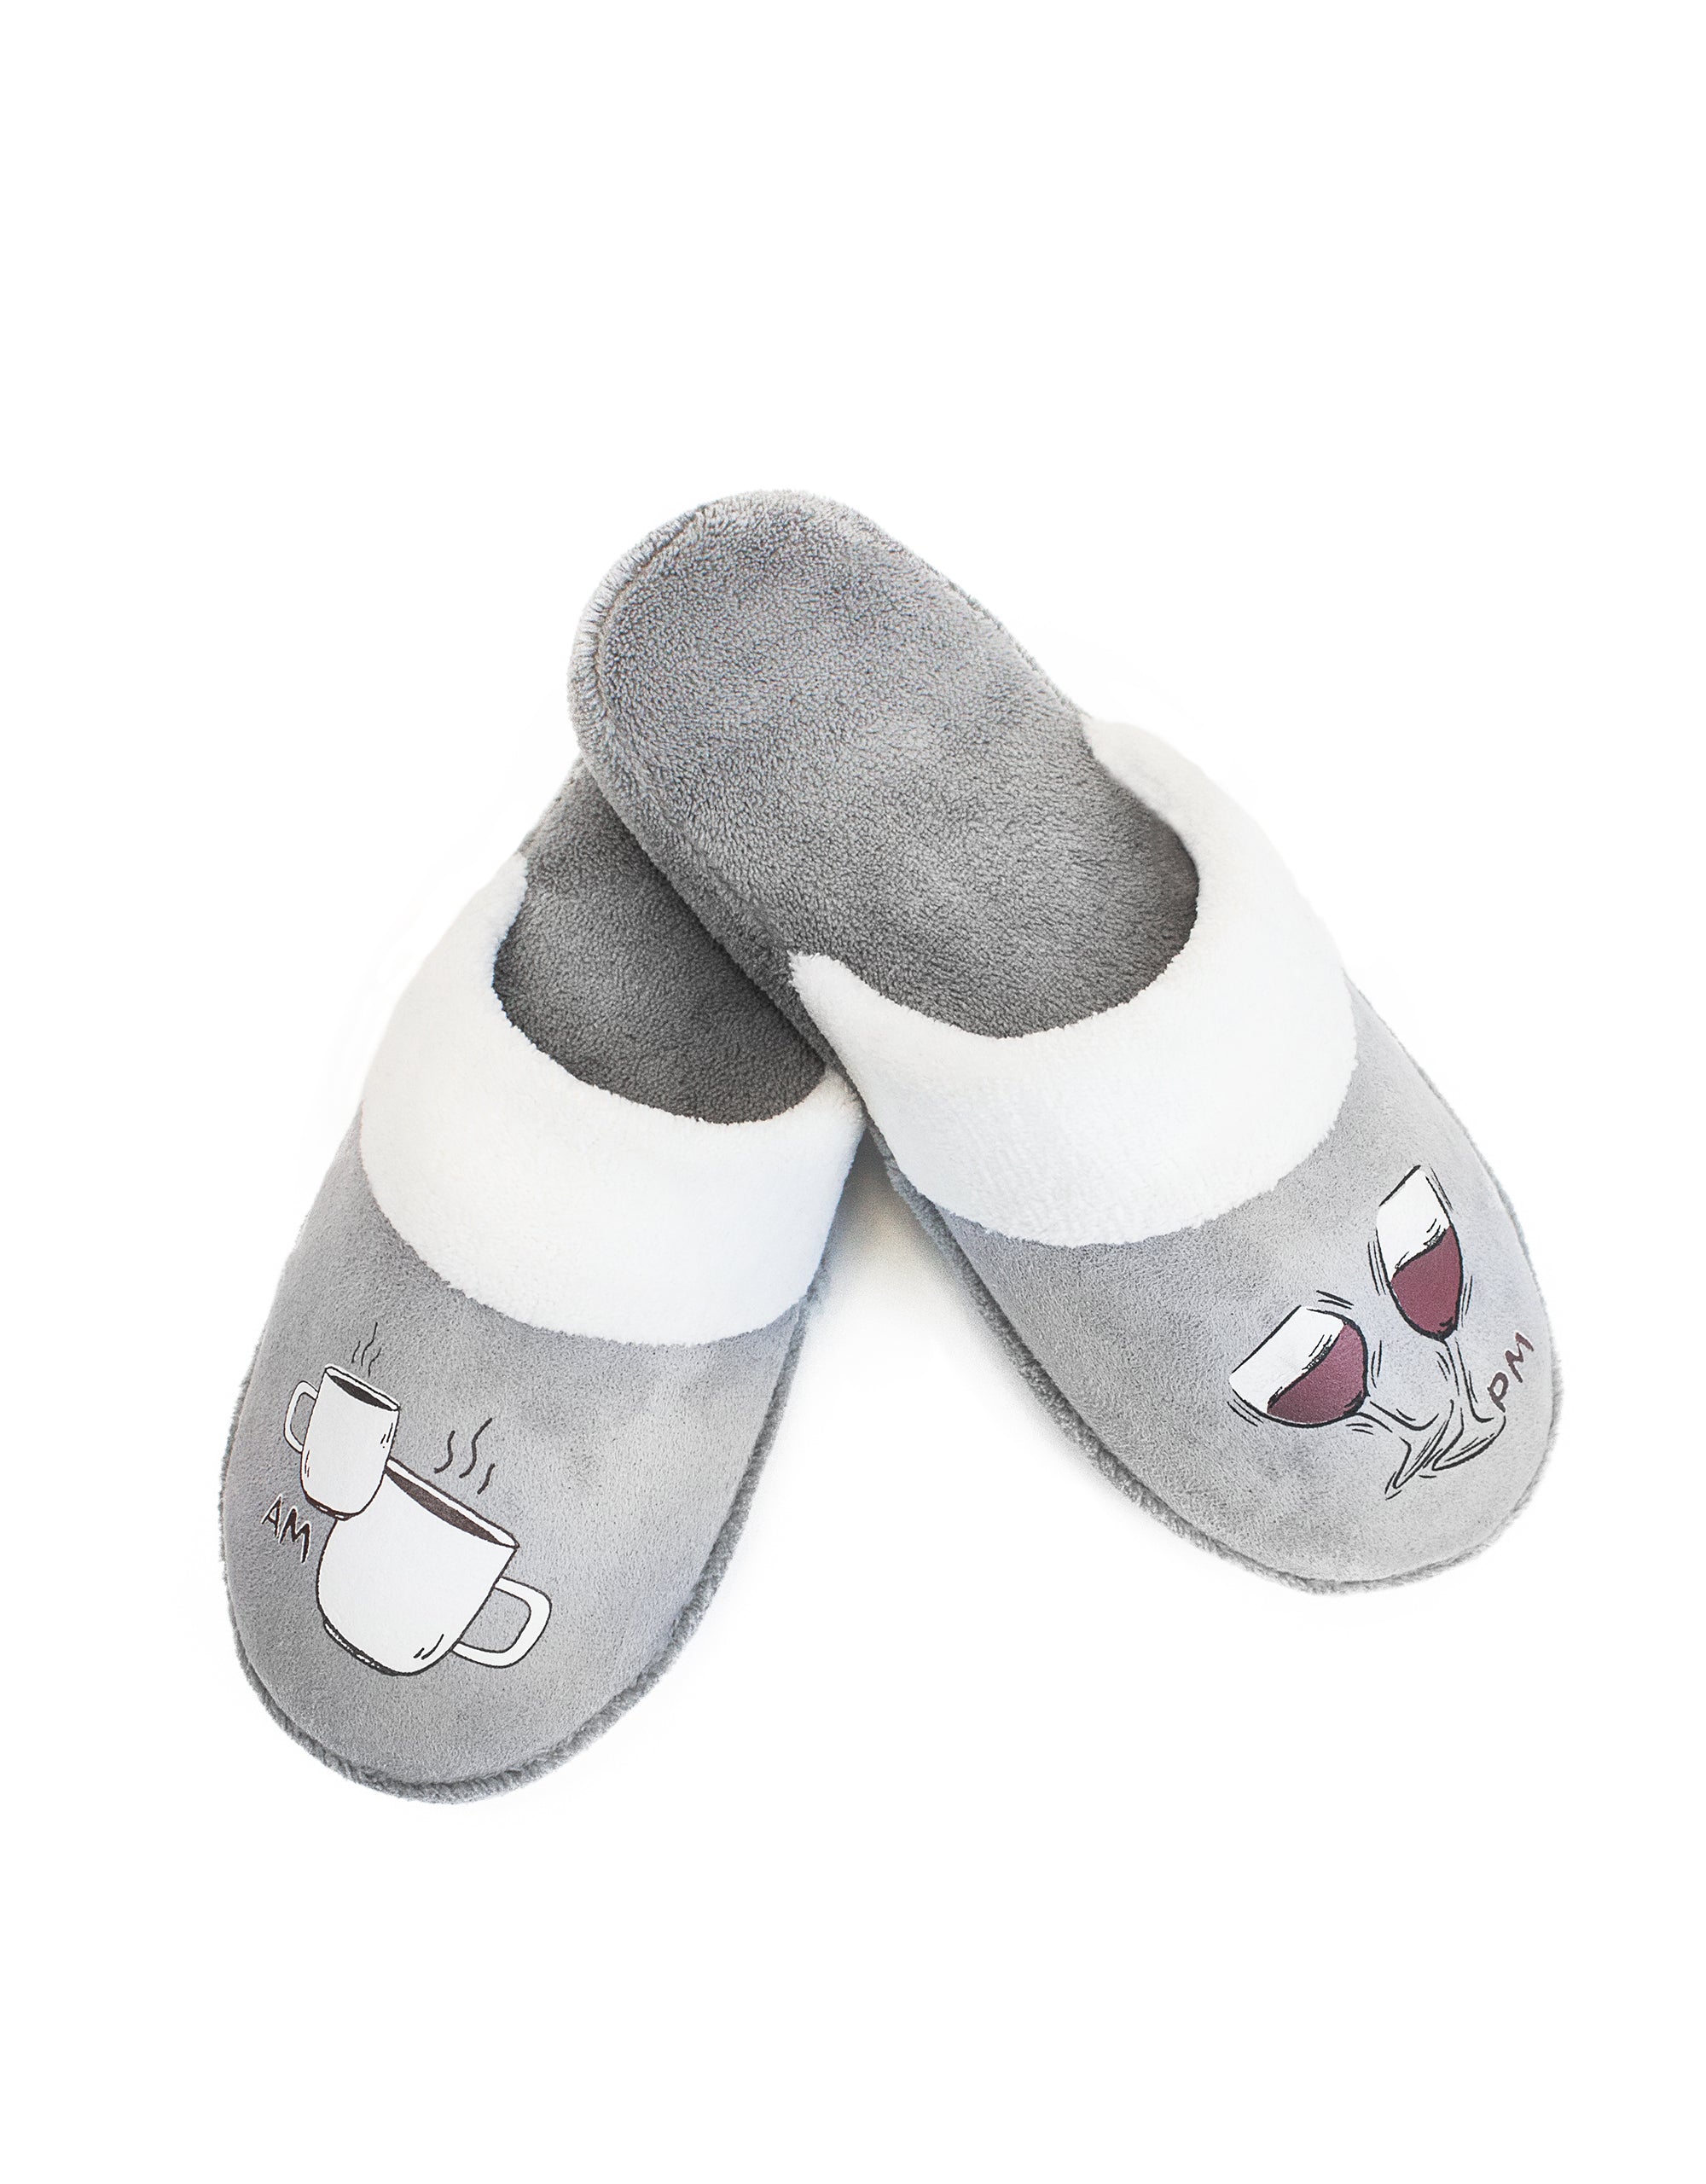 Gray Bat Slippers - Sizes 6 to 12 – Em & Sprout